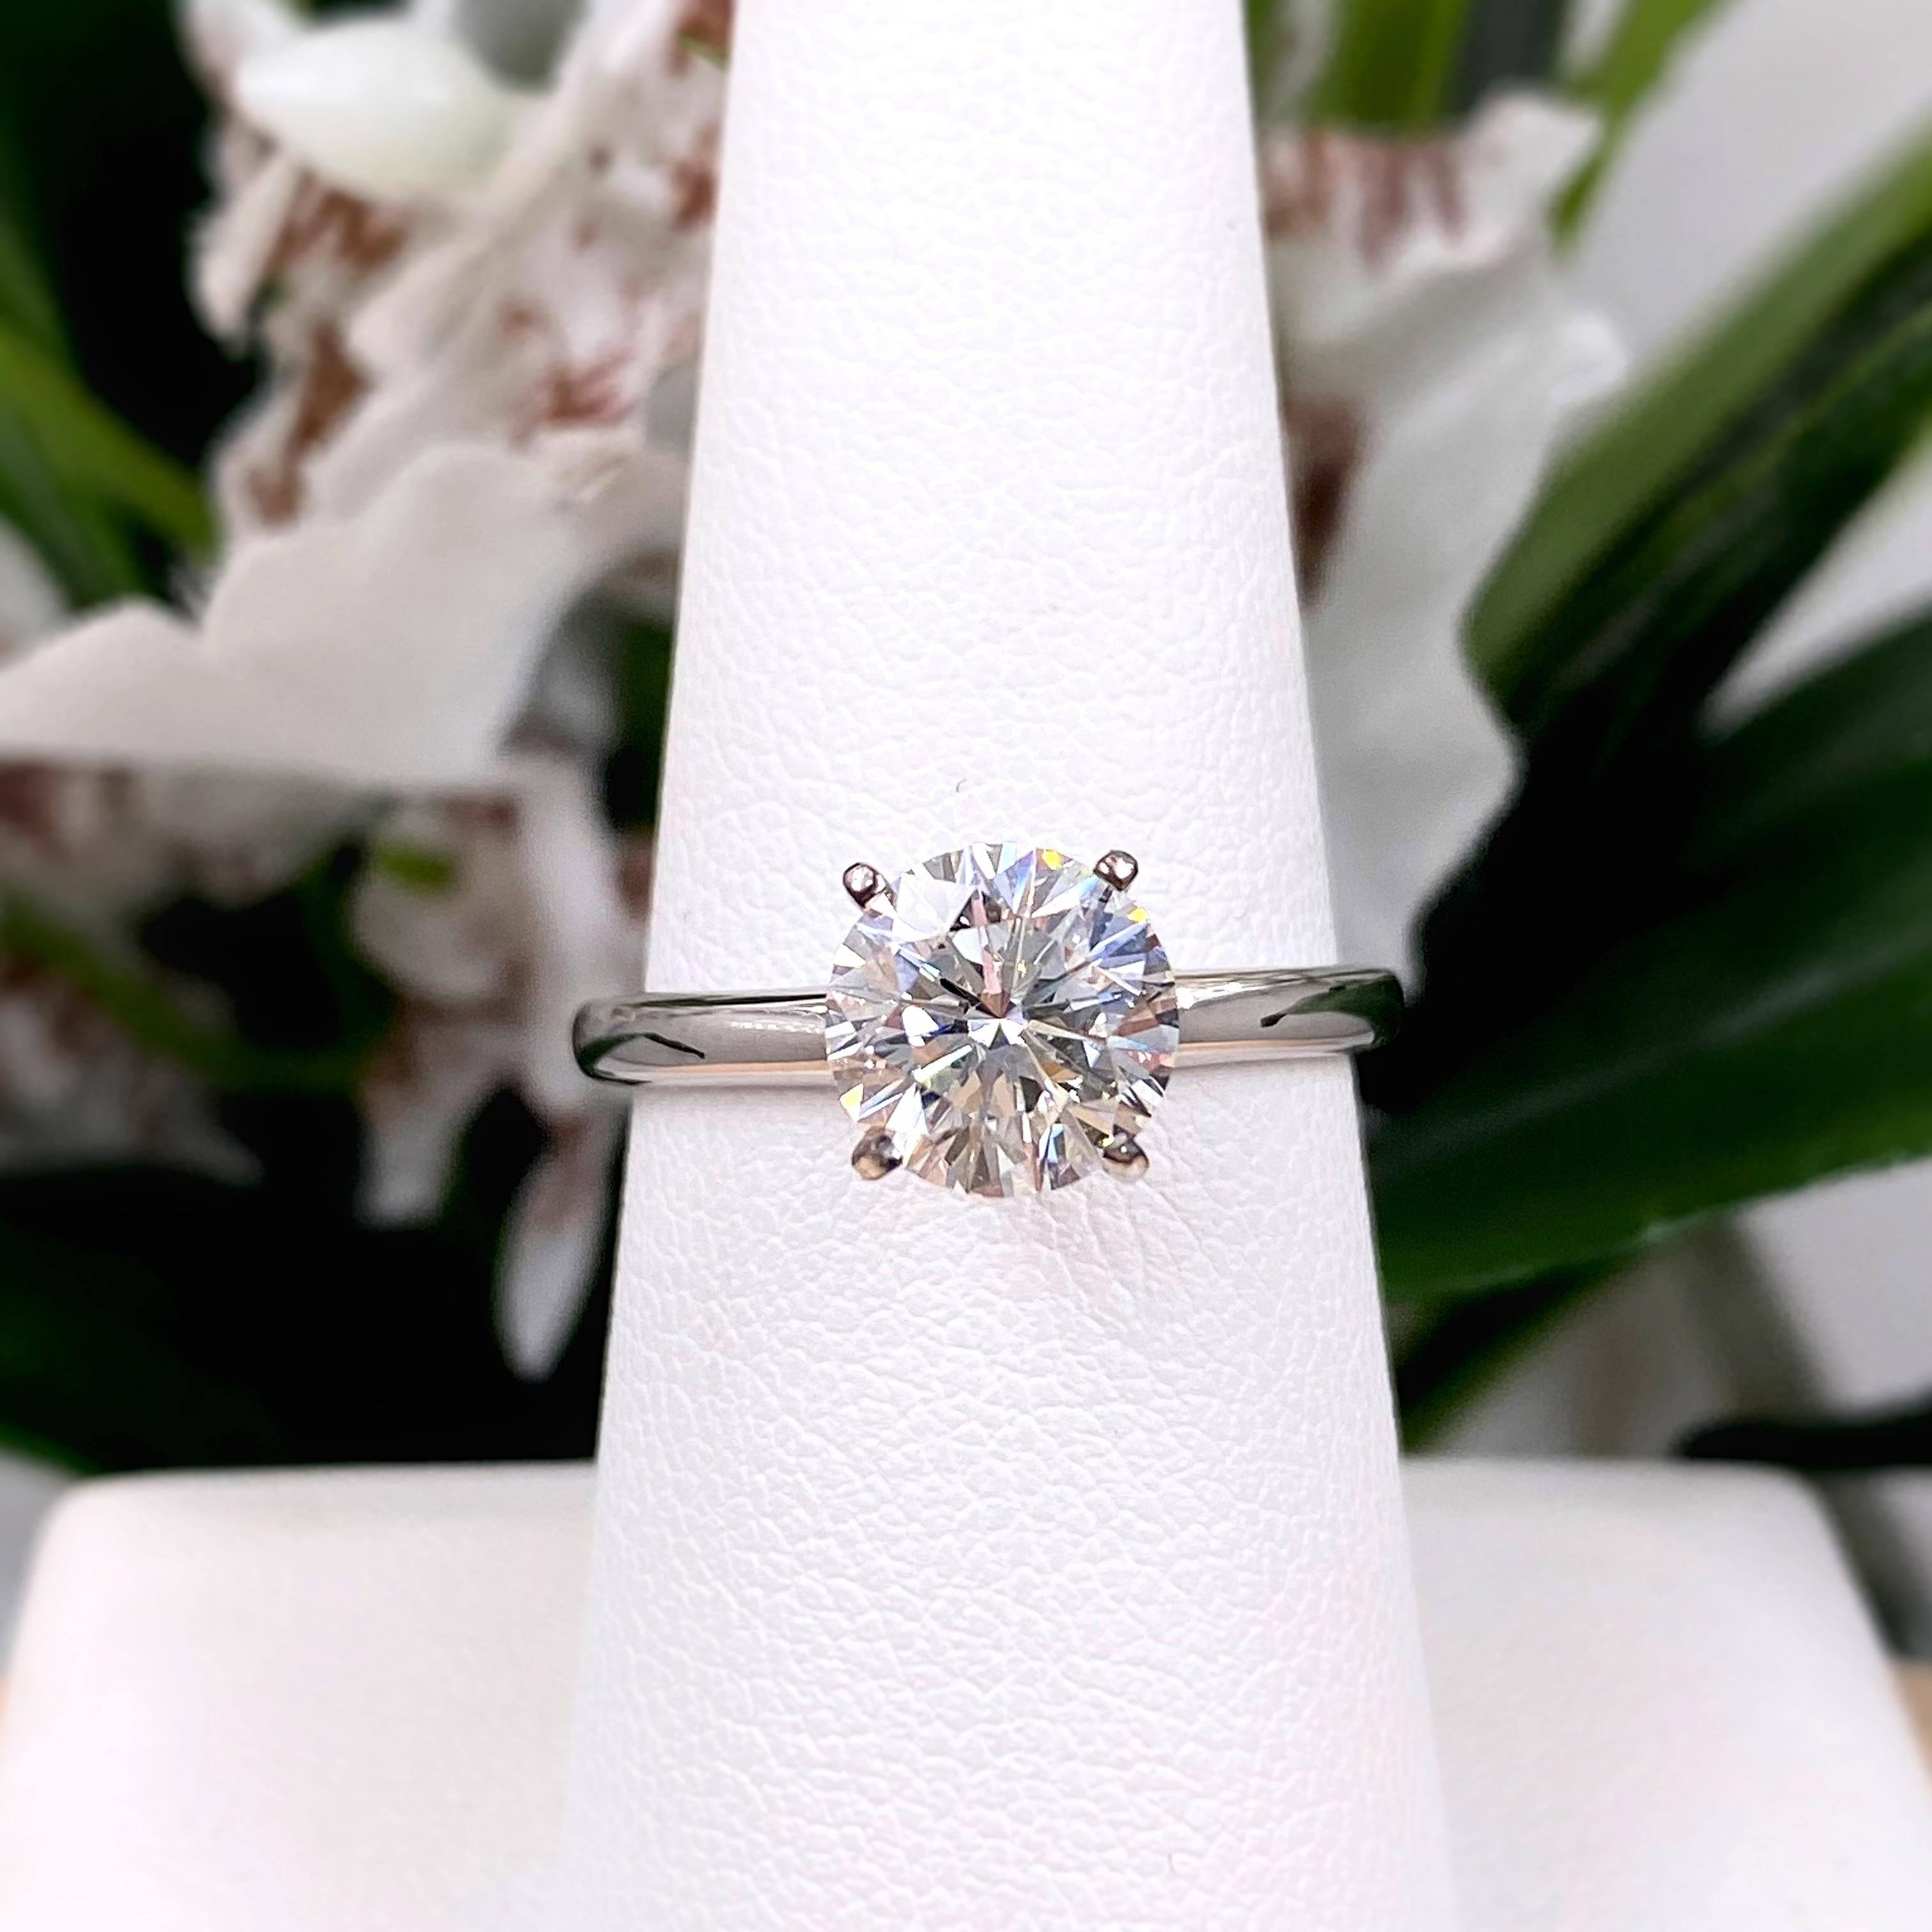 LEO Round Brilliant Diamond 1.52 Carat H SI1 Solitaire Ring 14 Karat WG PLAT In Excellent Condition For Sale In San Diego, CA